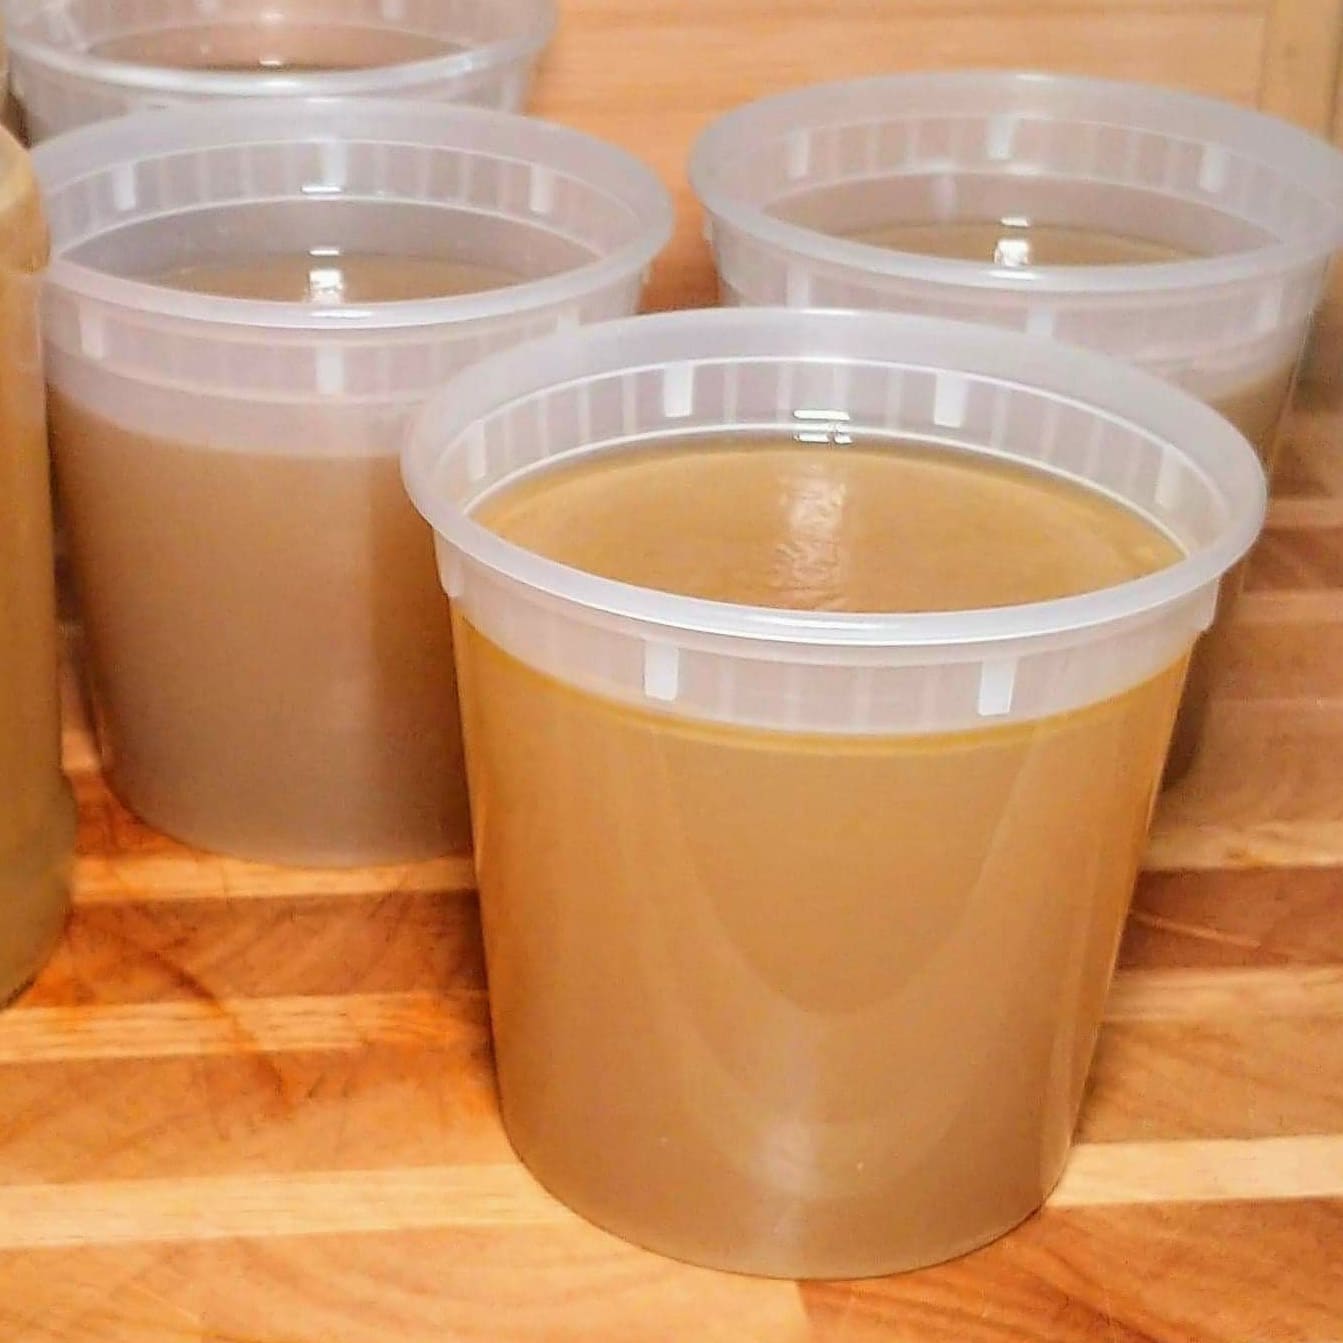 Homemade Chicken Stock for the "Queen of soup"